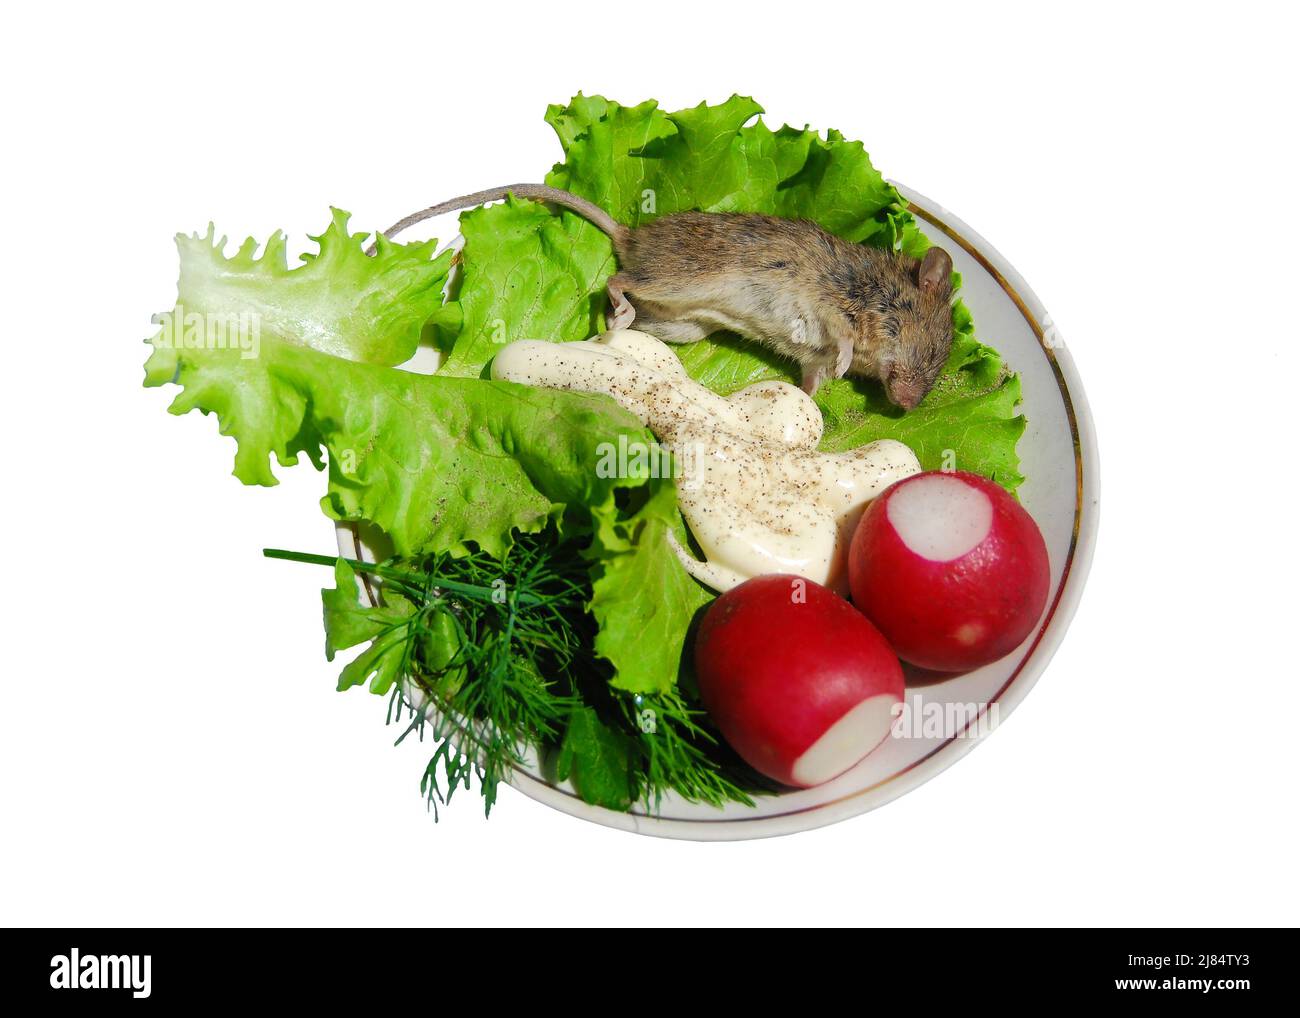 Dead mouse on a porcelain dish with radishes, dill, lettuce and sauce. Isolated on white Stock Photo